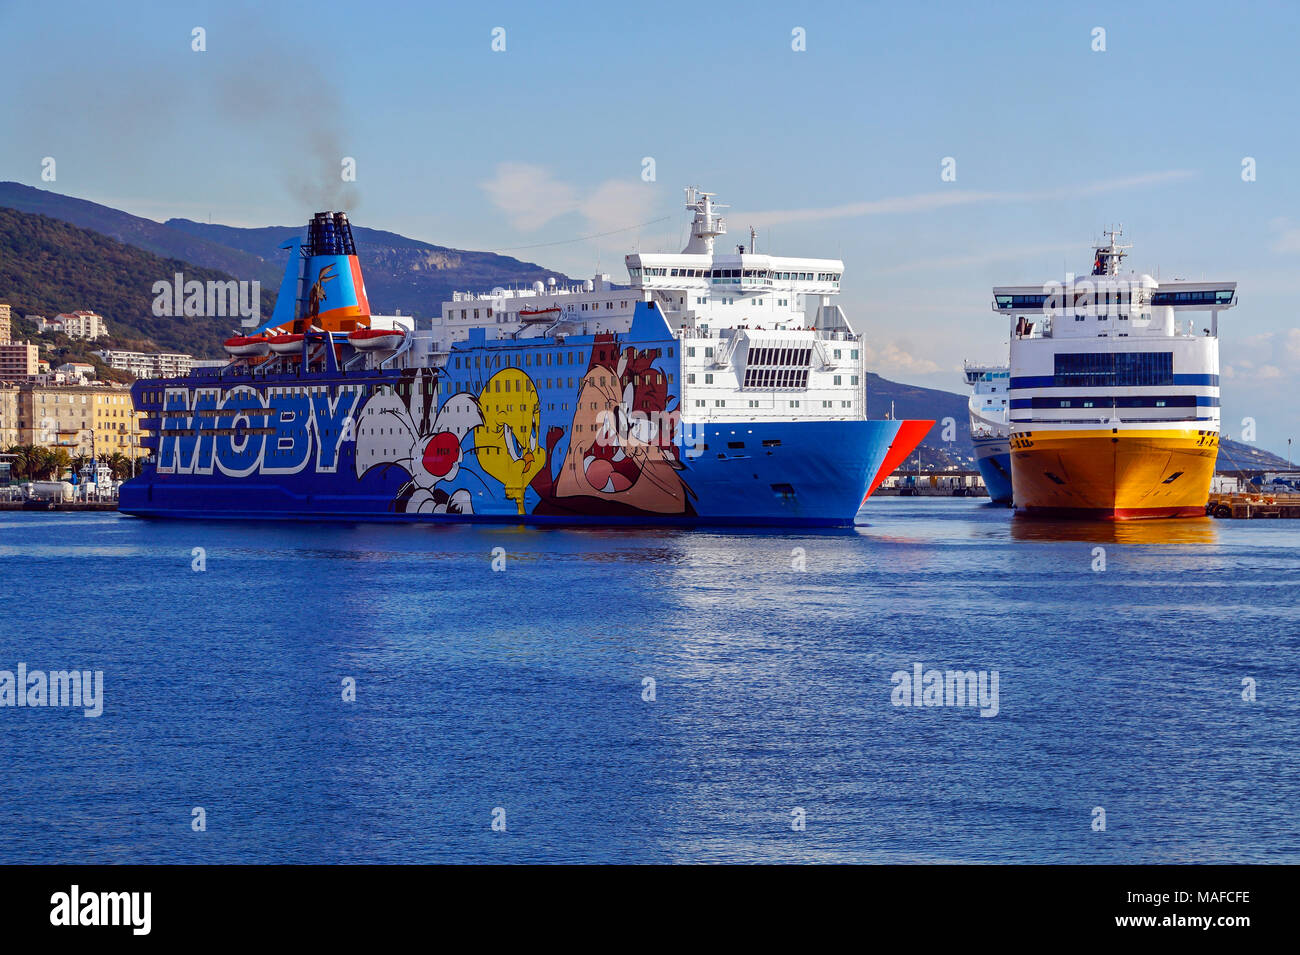 Mobi ferry Moby Dada leaving port of Bastia Corsica France Europe with Sardinia Andrea moored right Stock Photo